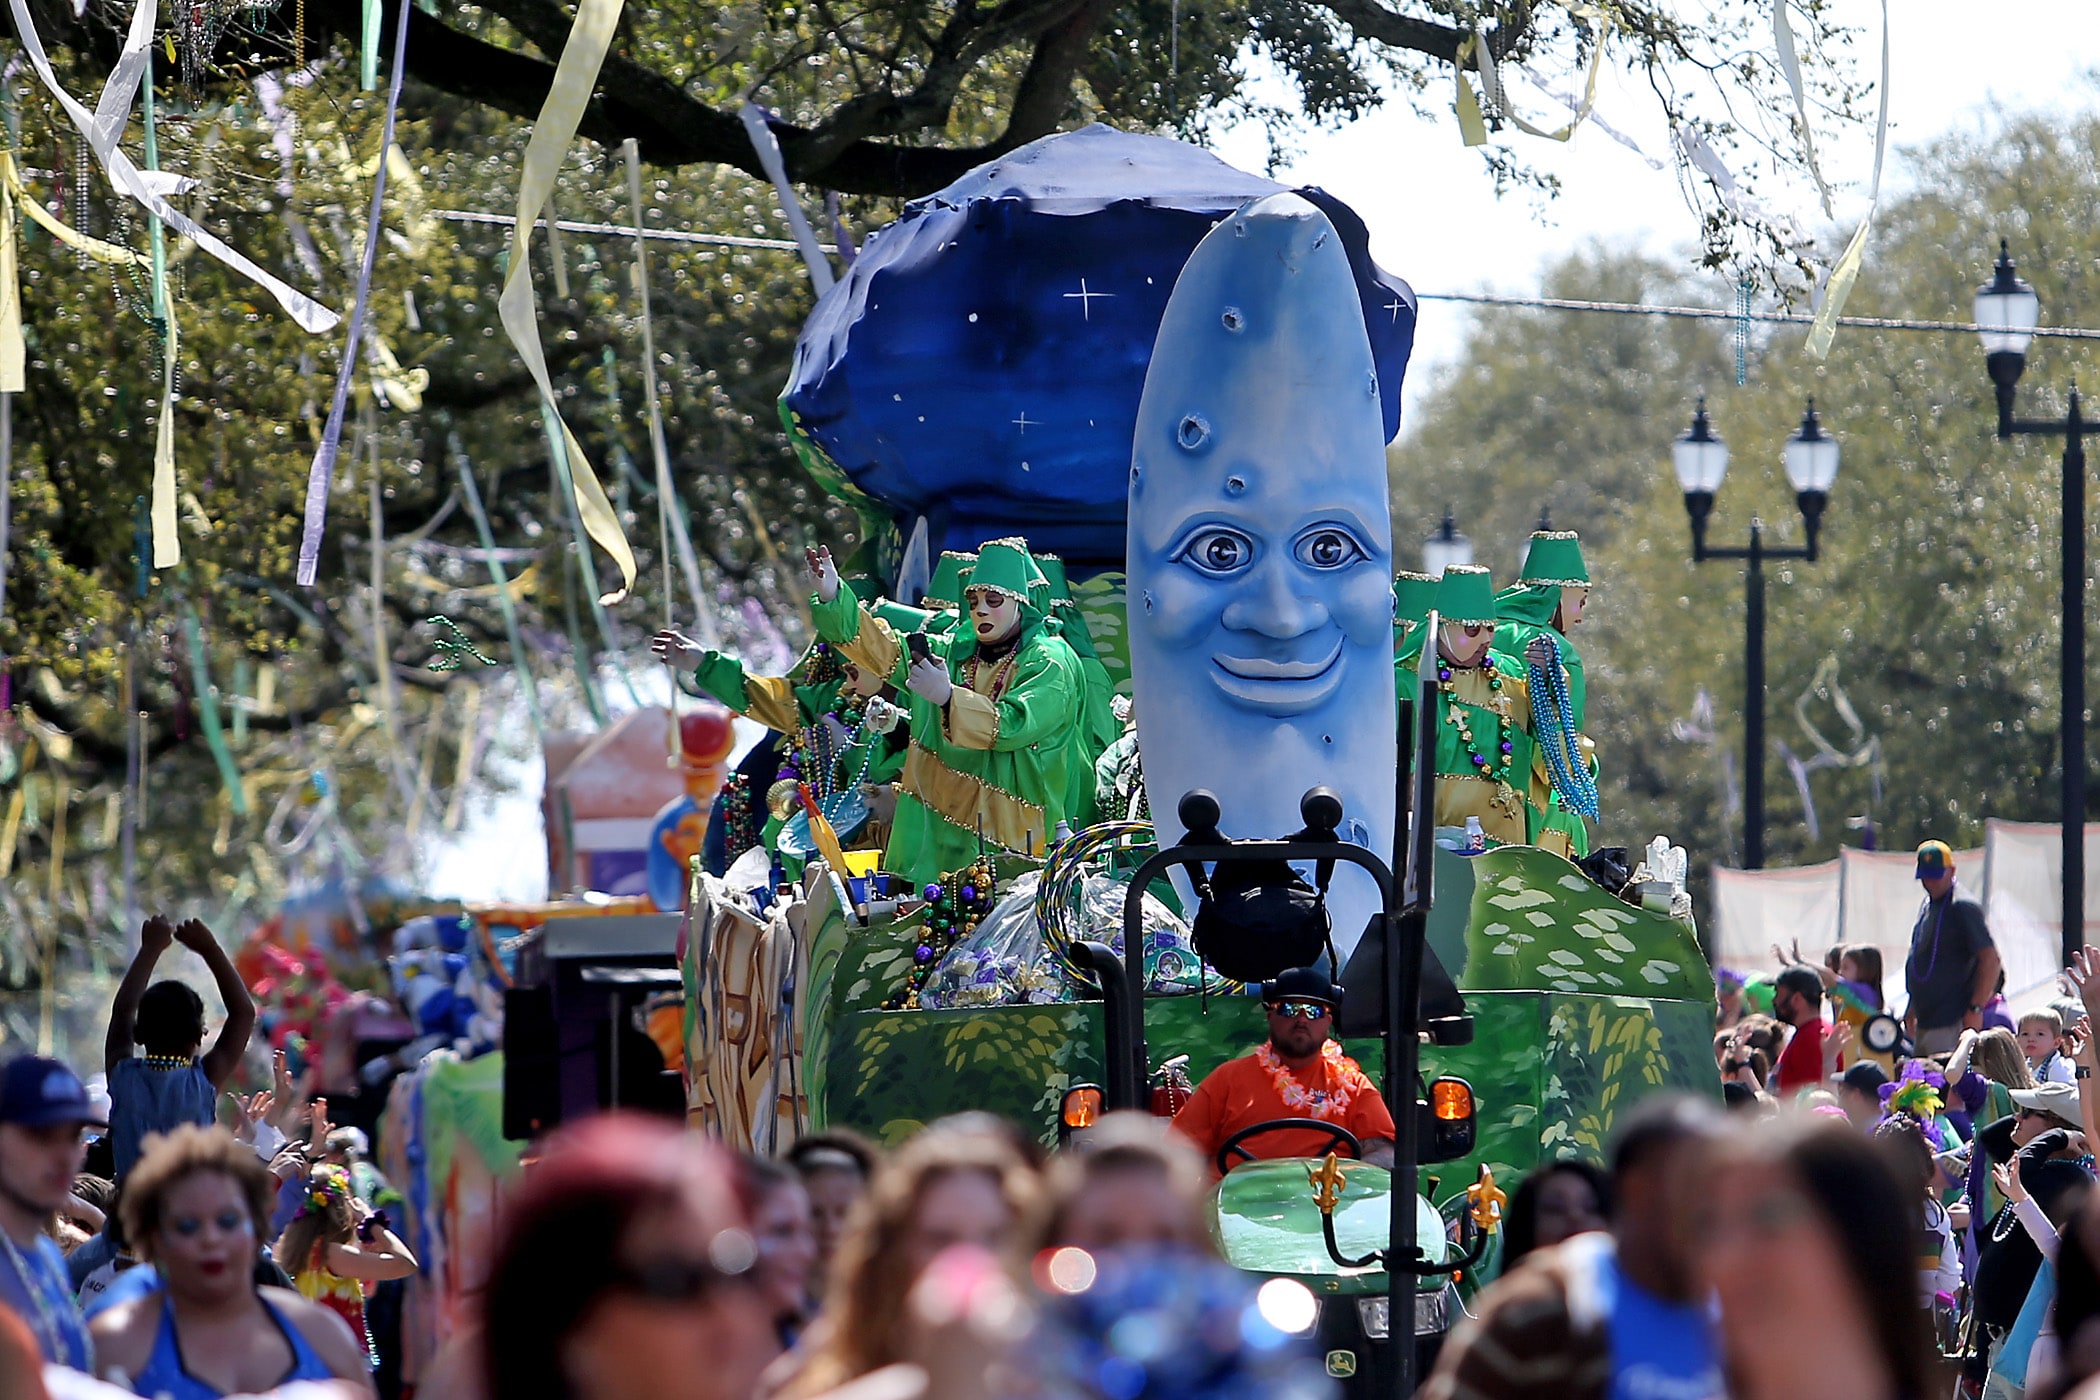 A float comes up Napoleon Avenue as the 320 riders of the Krewe of Okeanos roll down the Uptown route with their parade entitled “Oceans Honors the Gods” on Sunday, February 23, 2020. (Photo by Michael DeMocker)